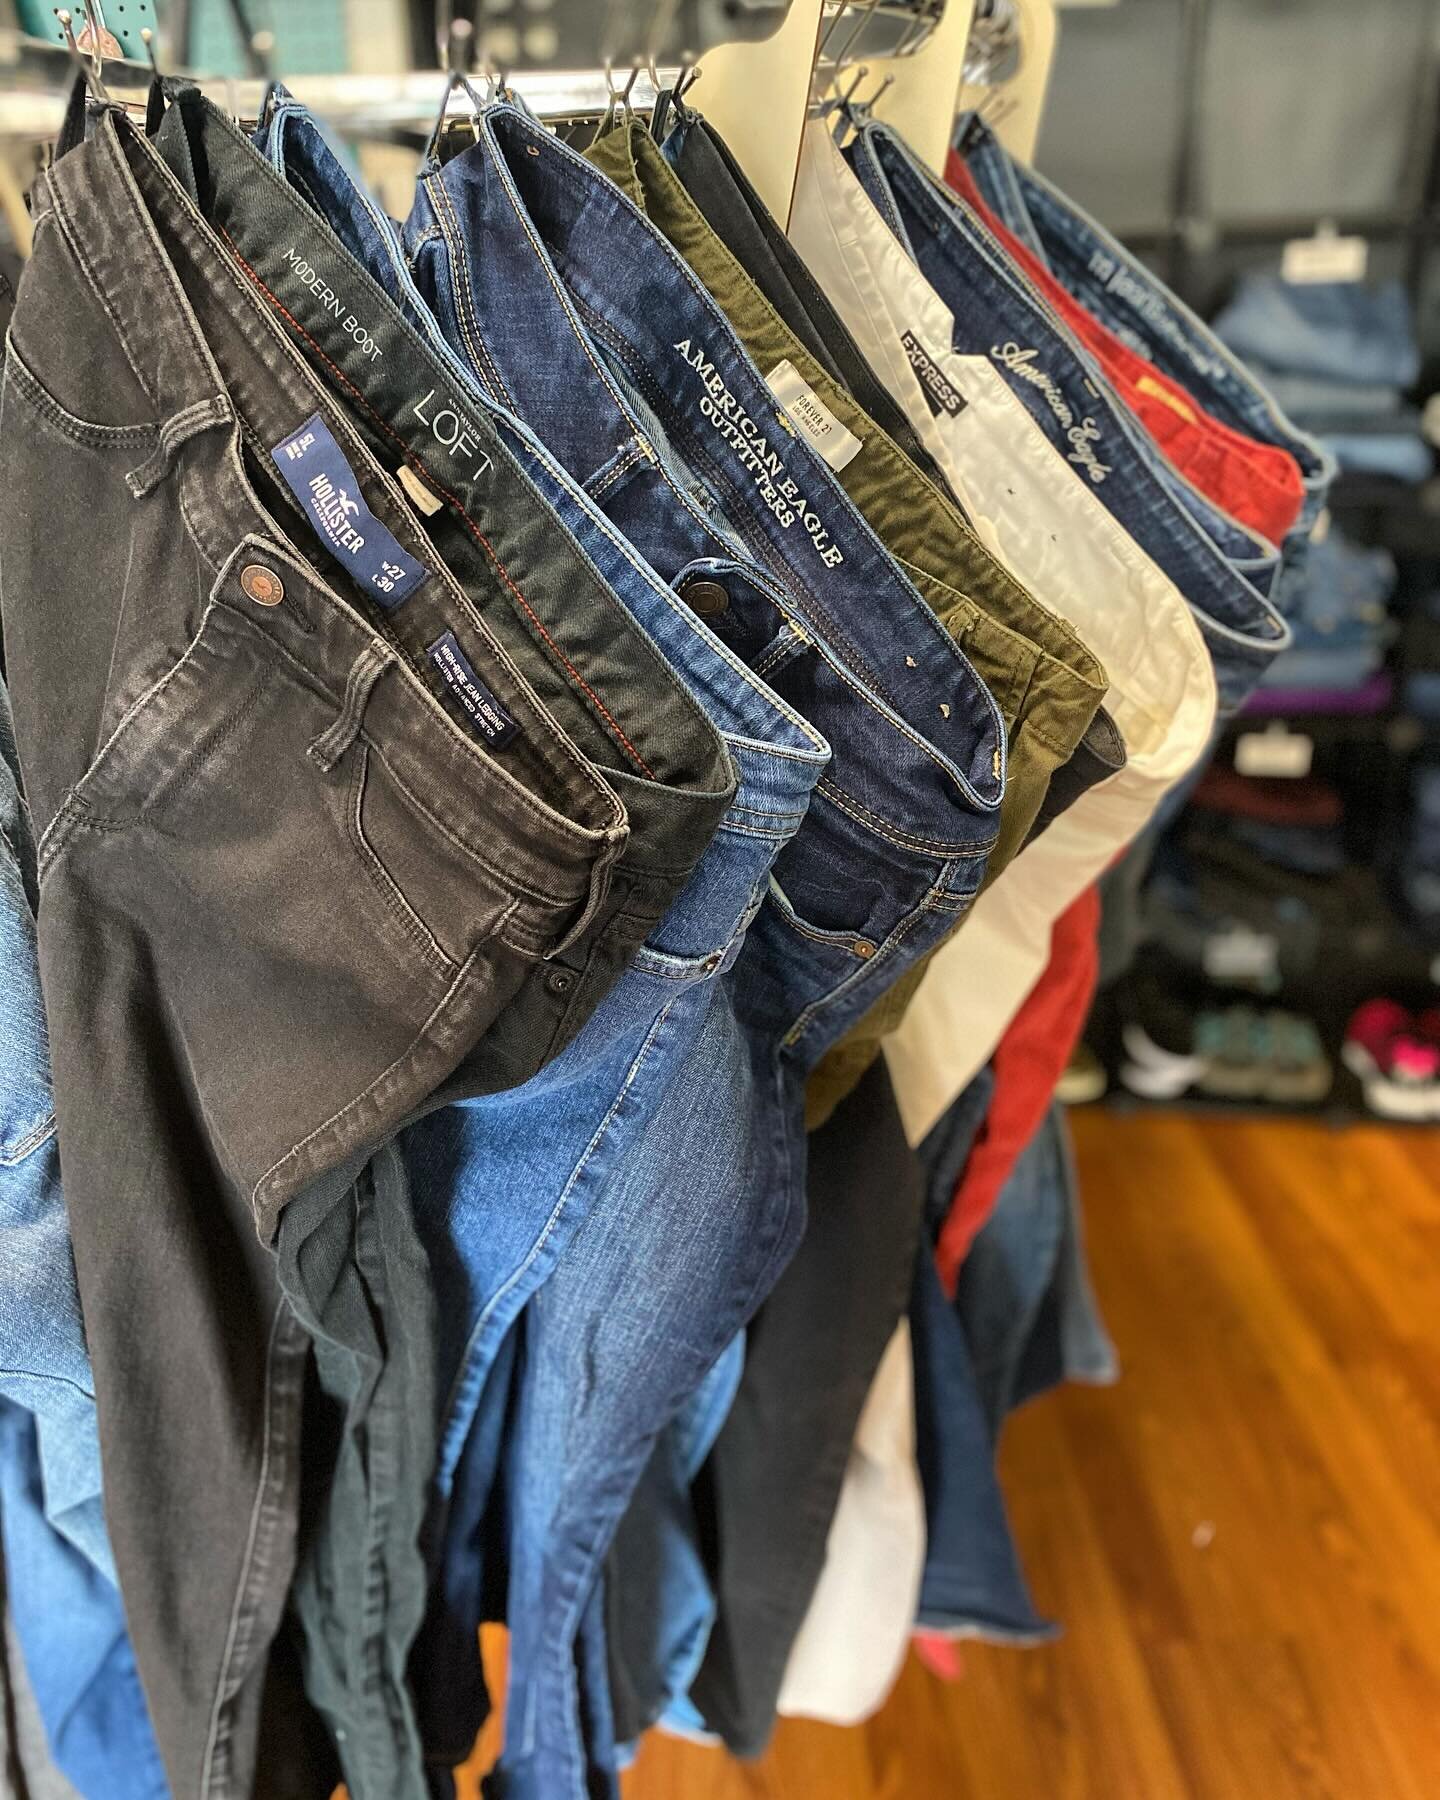 With our new rack it&rsquo;s easy to find your perfect jeans 😍
We have a large variety of incredible brands and always quality pieces 💗

Shop with us Wednesday- Saturday and help the mommas &amp; babies of Place 4 Grace 💕

🛍️ P4G Thrift
506 N Mai